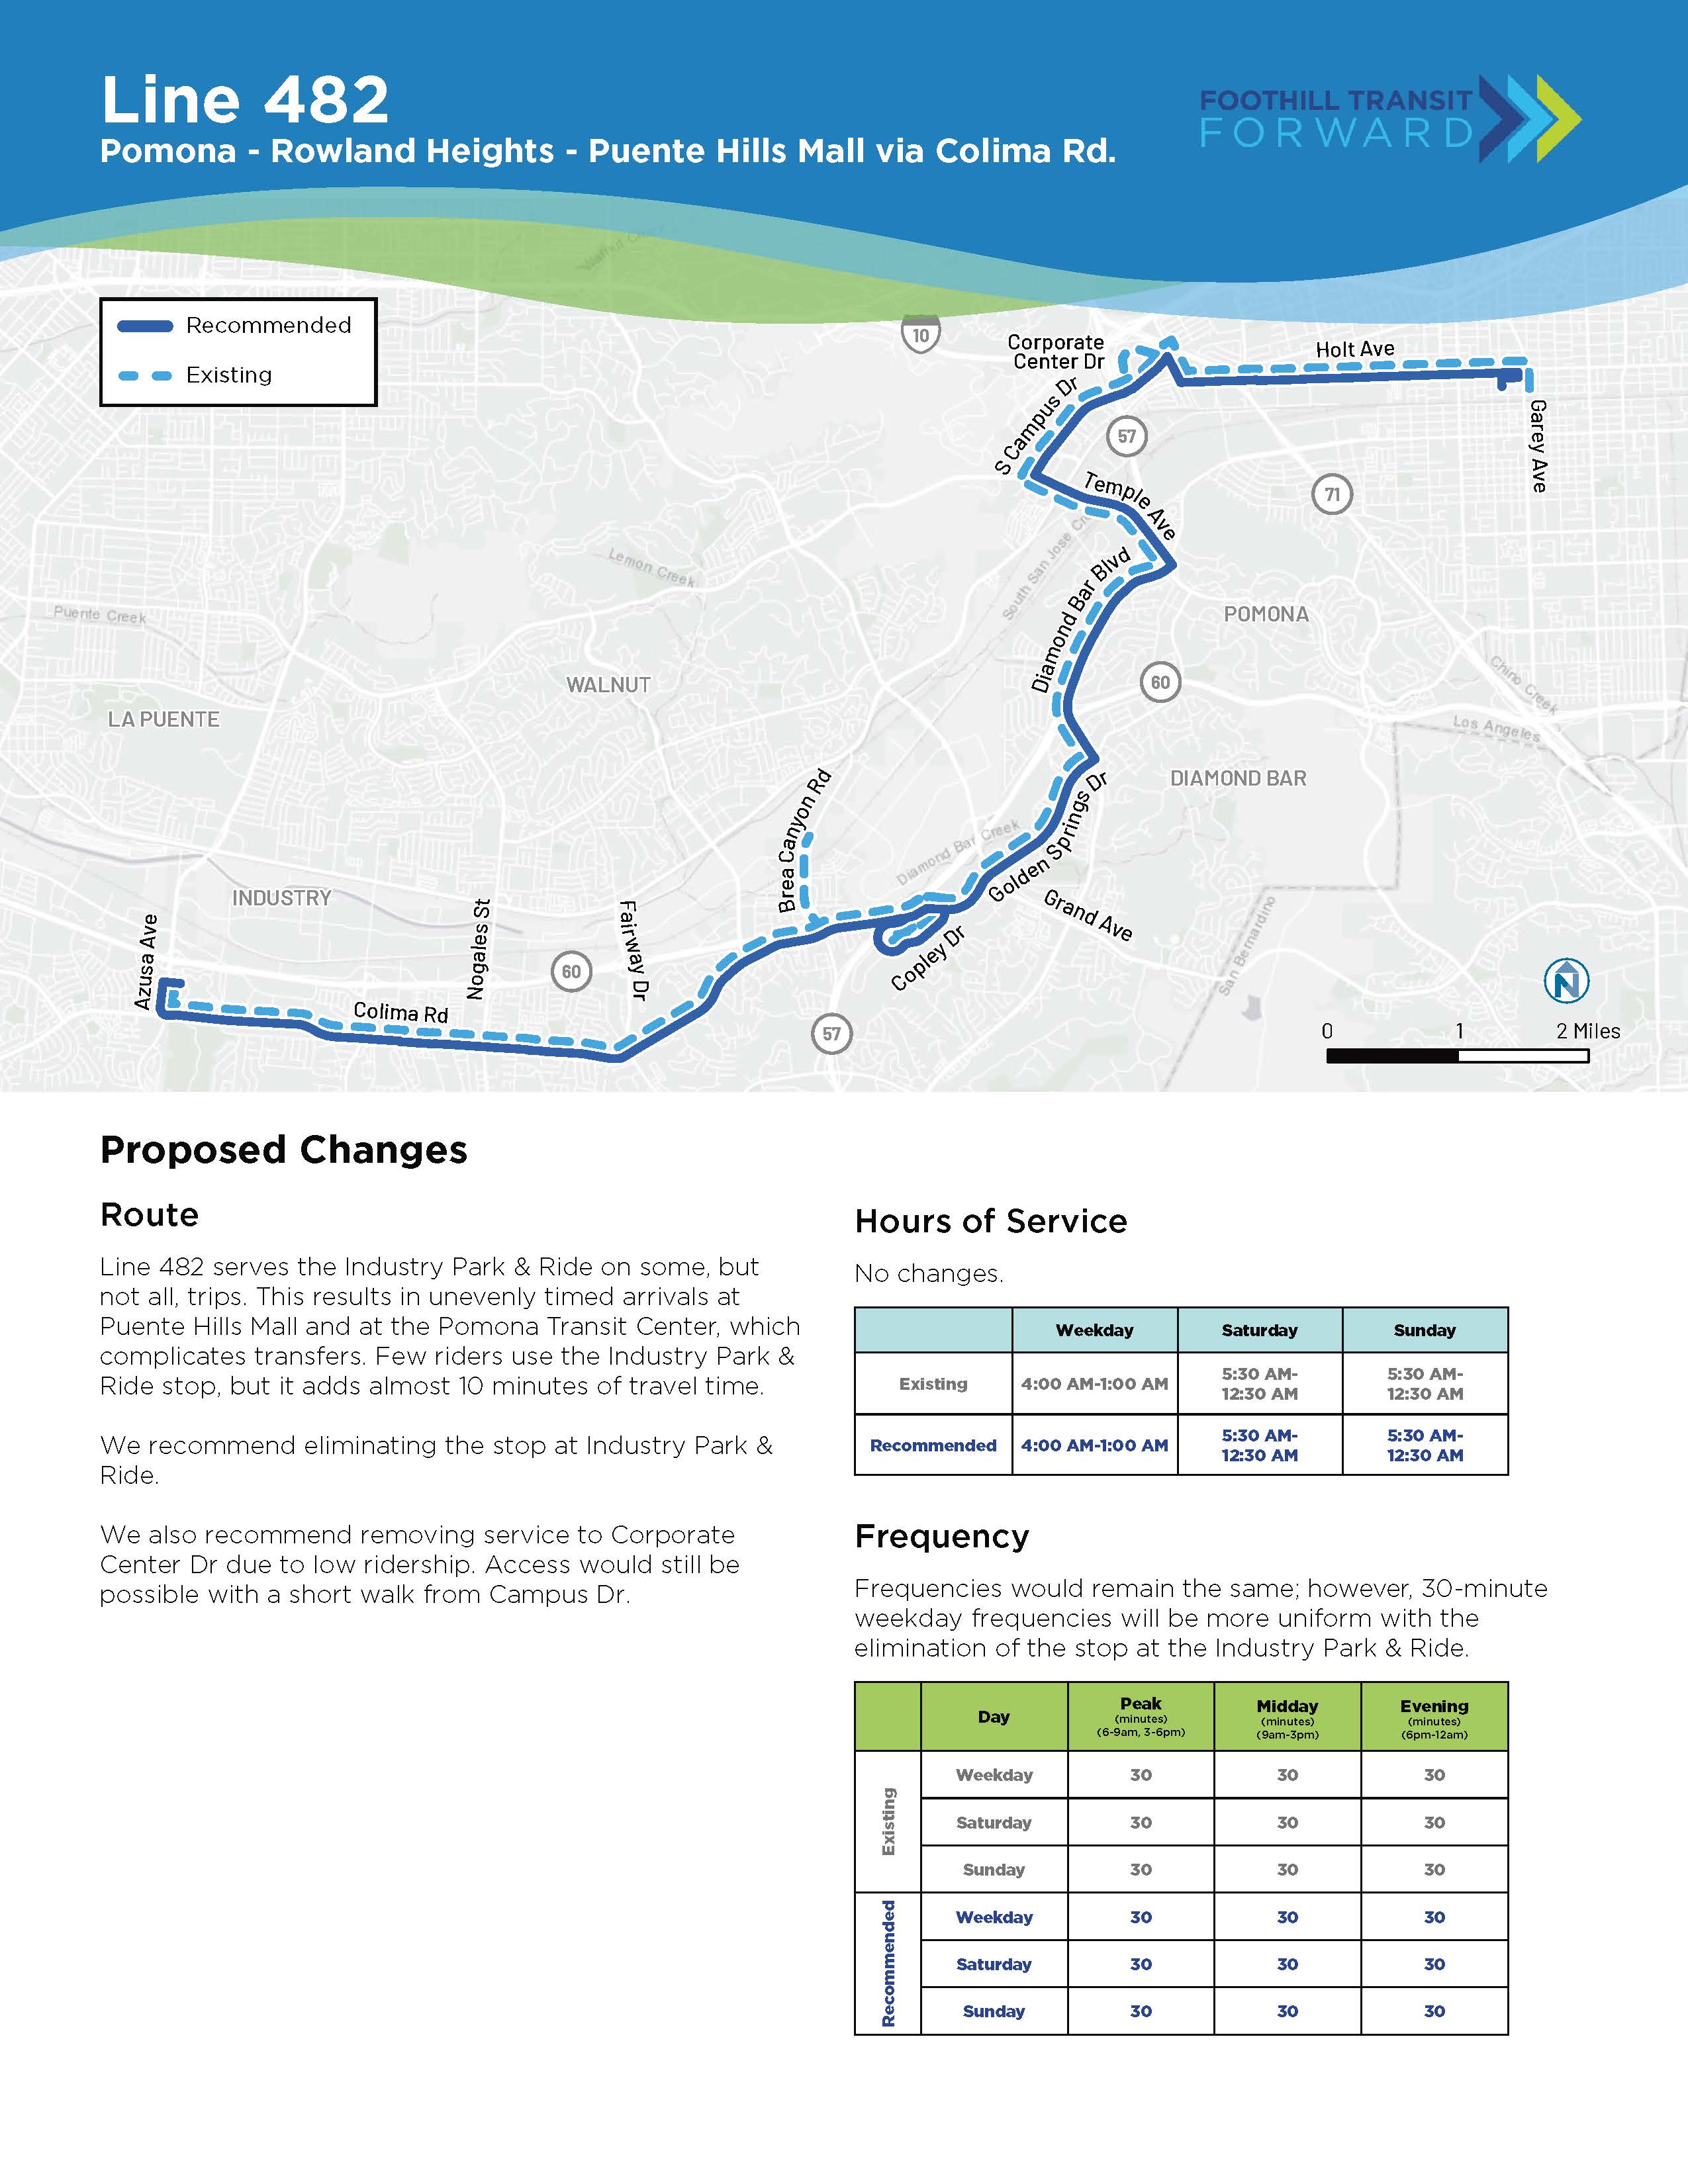 Proposed Changes: Line 482 serves Industry Park & Ride on only some trips, resulting in unevenly timed arrivals at Puente Hills Mall and the Pomona Transit Center, which complicates transfers. Few riders use the Park & Ride stop, but it adds almost 10 minutes of travel. We recommend eliminating it.  We also recommend removing service to Corporate Center Dr due to low ridership. Access would be possible with a short walk from Campus Dr. Hours of Service: No changes. Weekday frequencies would be more uniform.